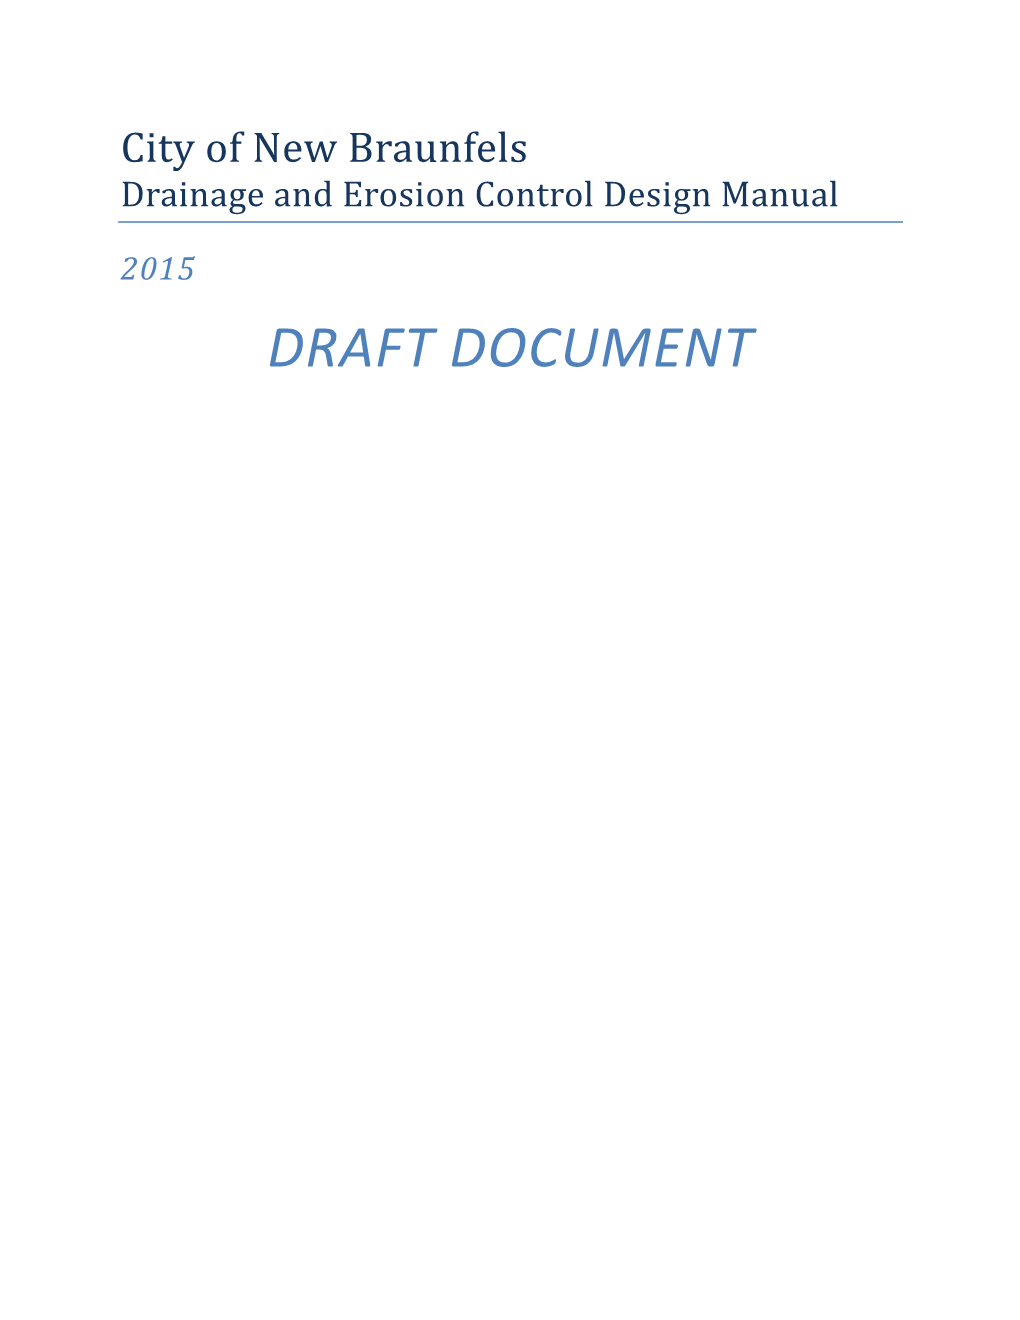 City of New Braunfels Drainage and Erosion Control Design Manual